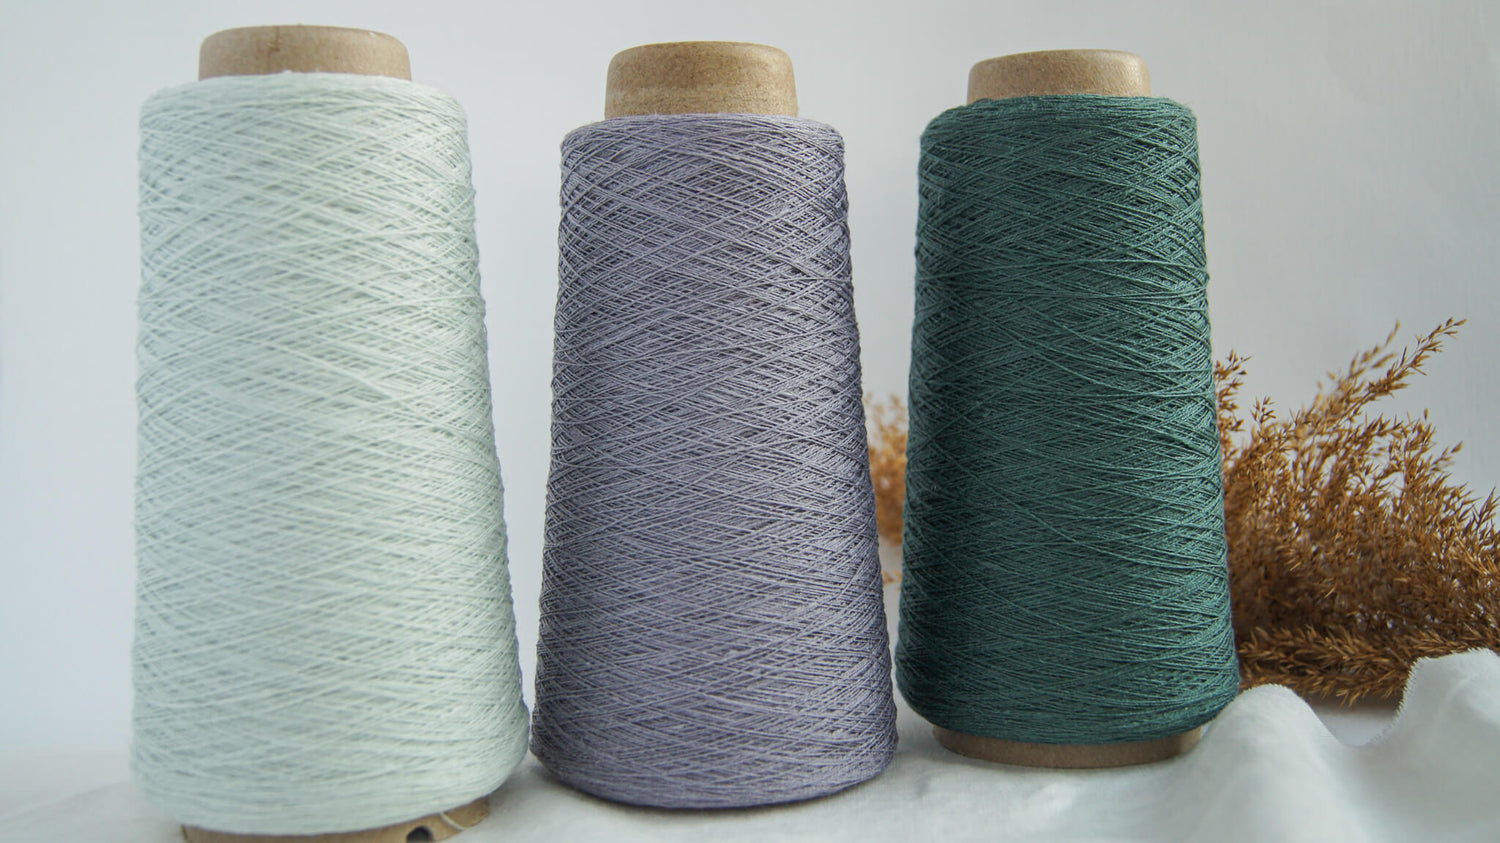 Fil de lin sur cone pour tricot machine et tissage - 2 ply linen yarn on cone for weaving and knitting machine